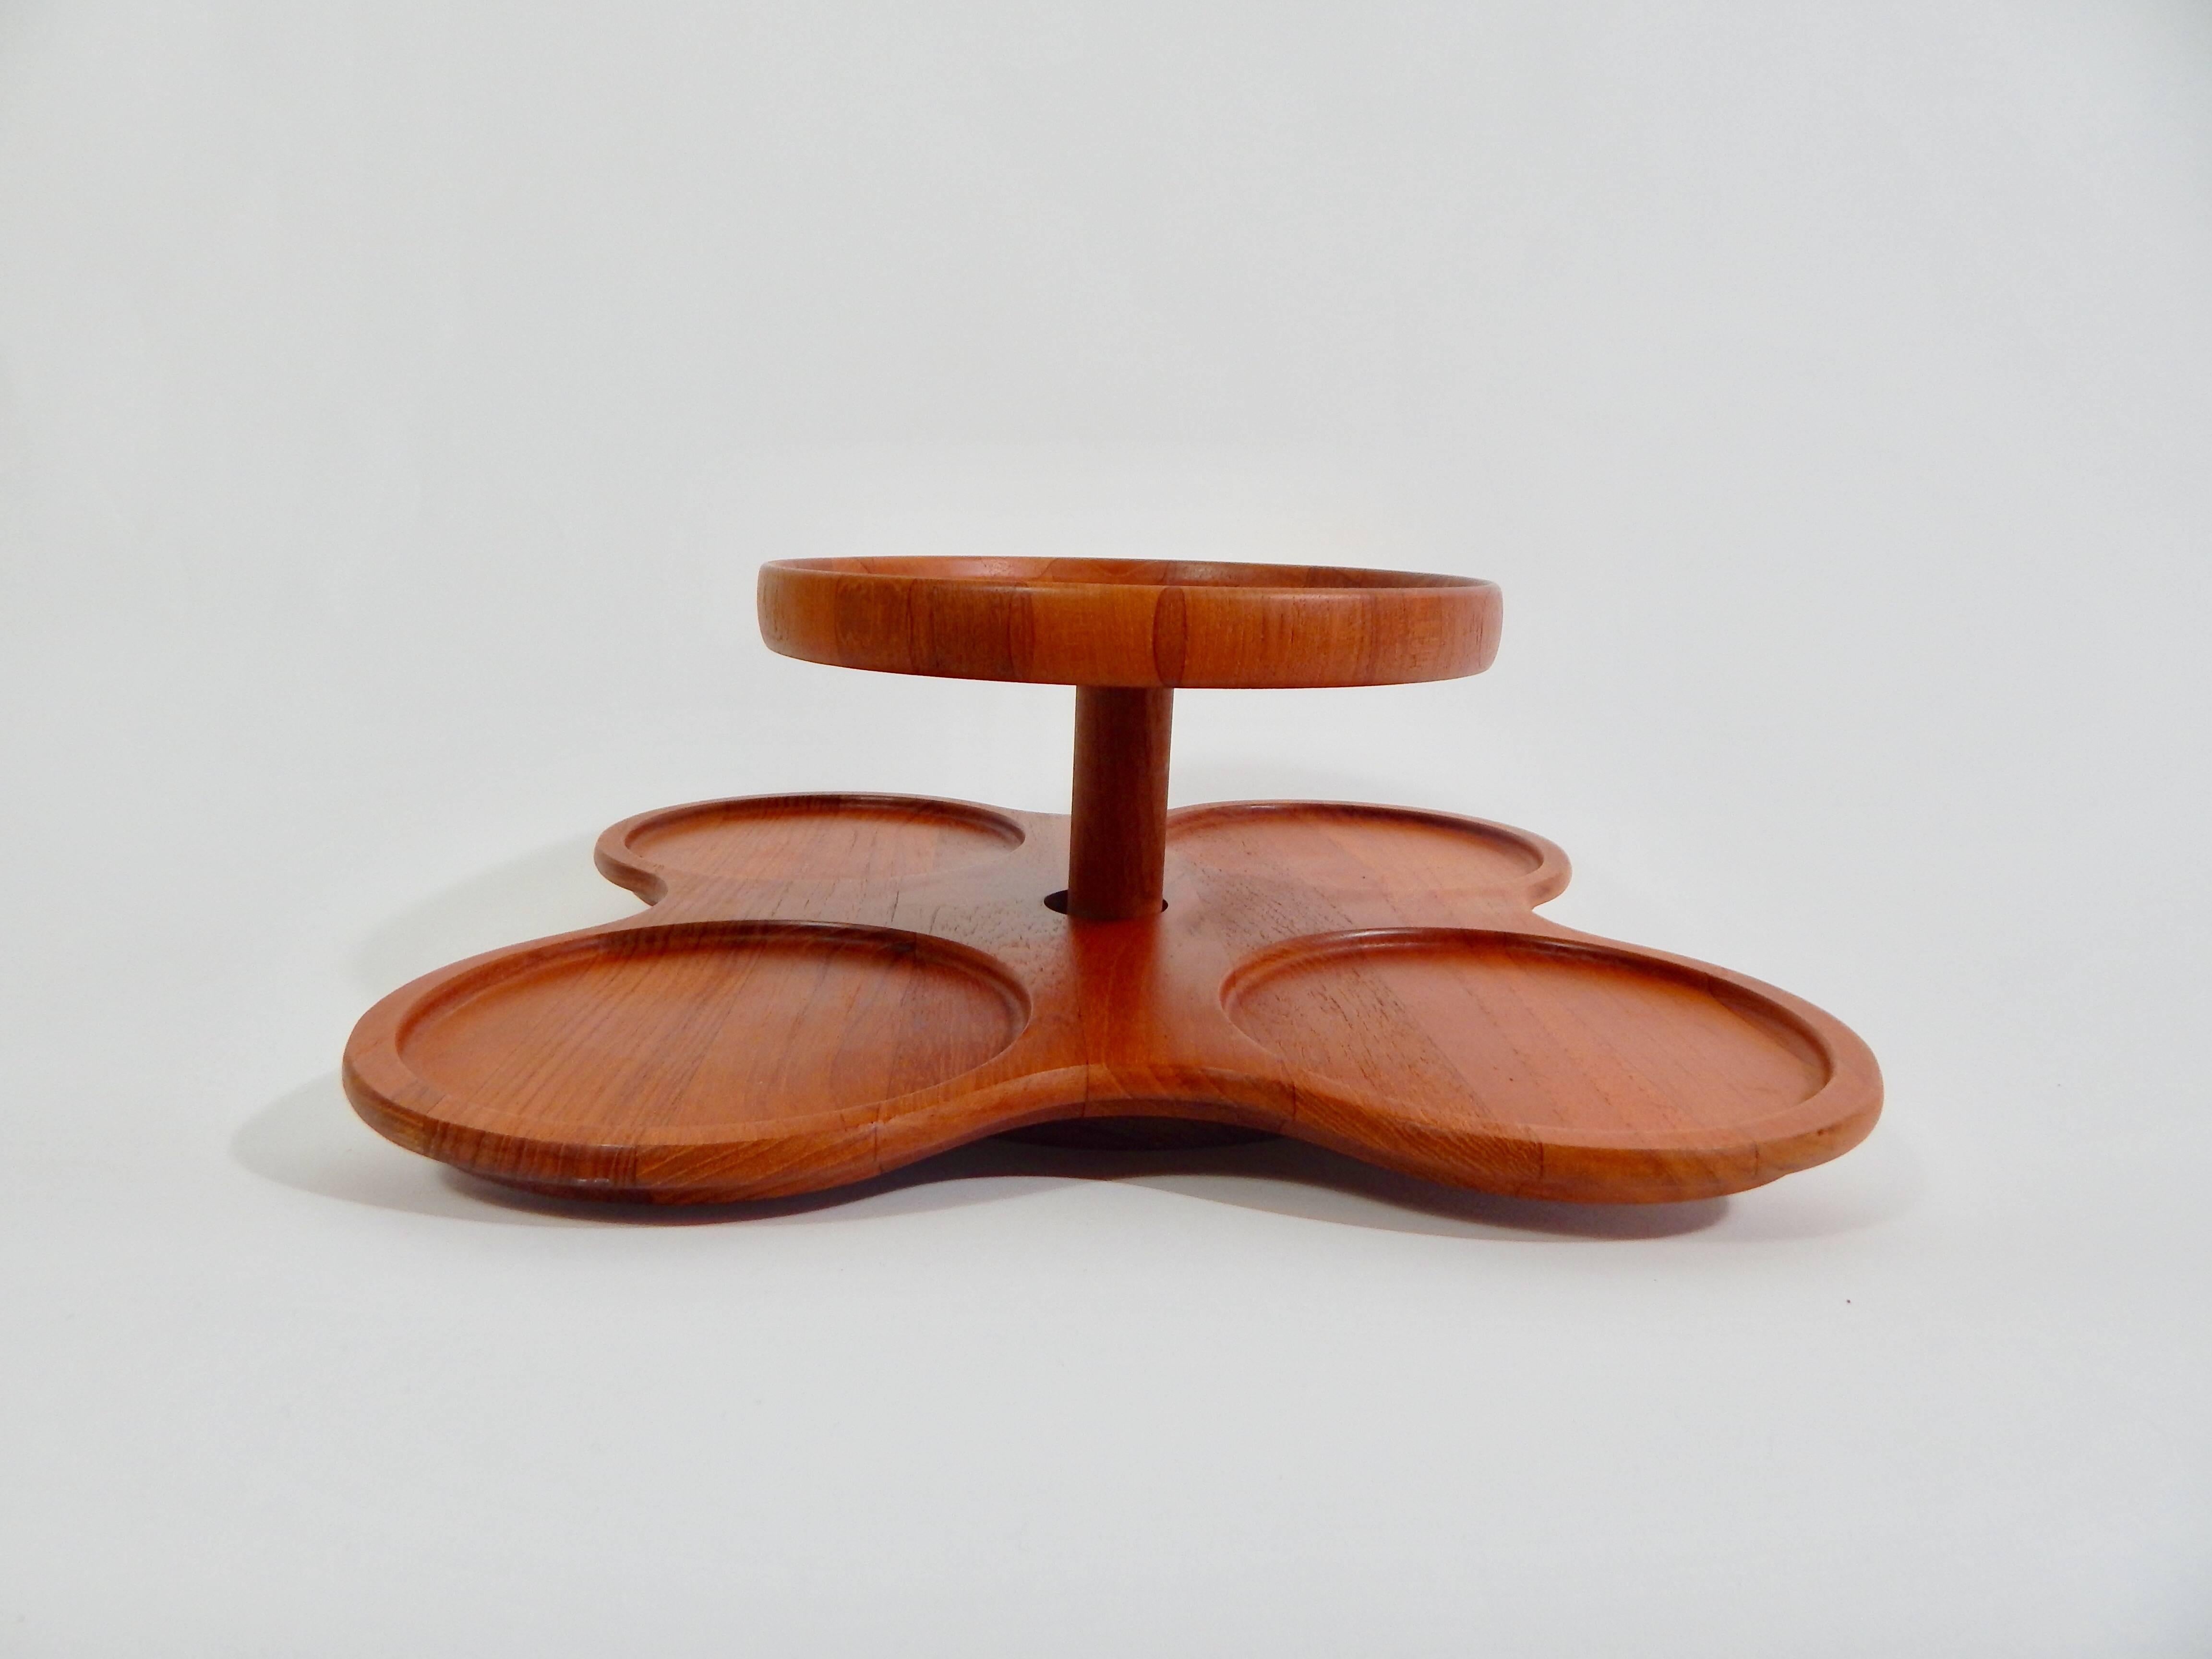 1960s midcentury Danish teak lazy susan by Digmed made in Denmark.
Two-tiered serving piece. Excellent condition.